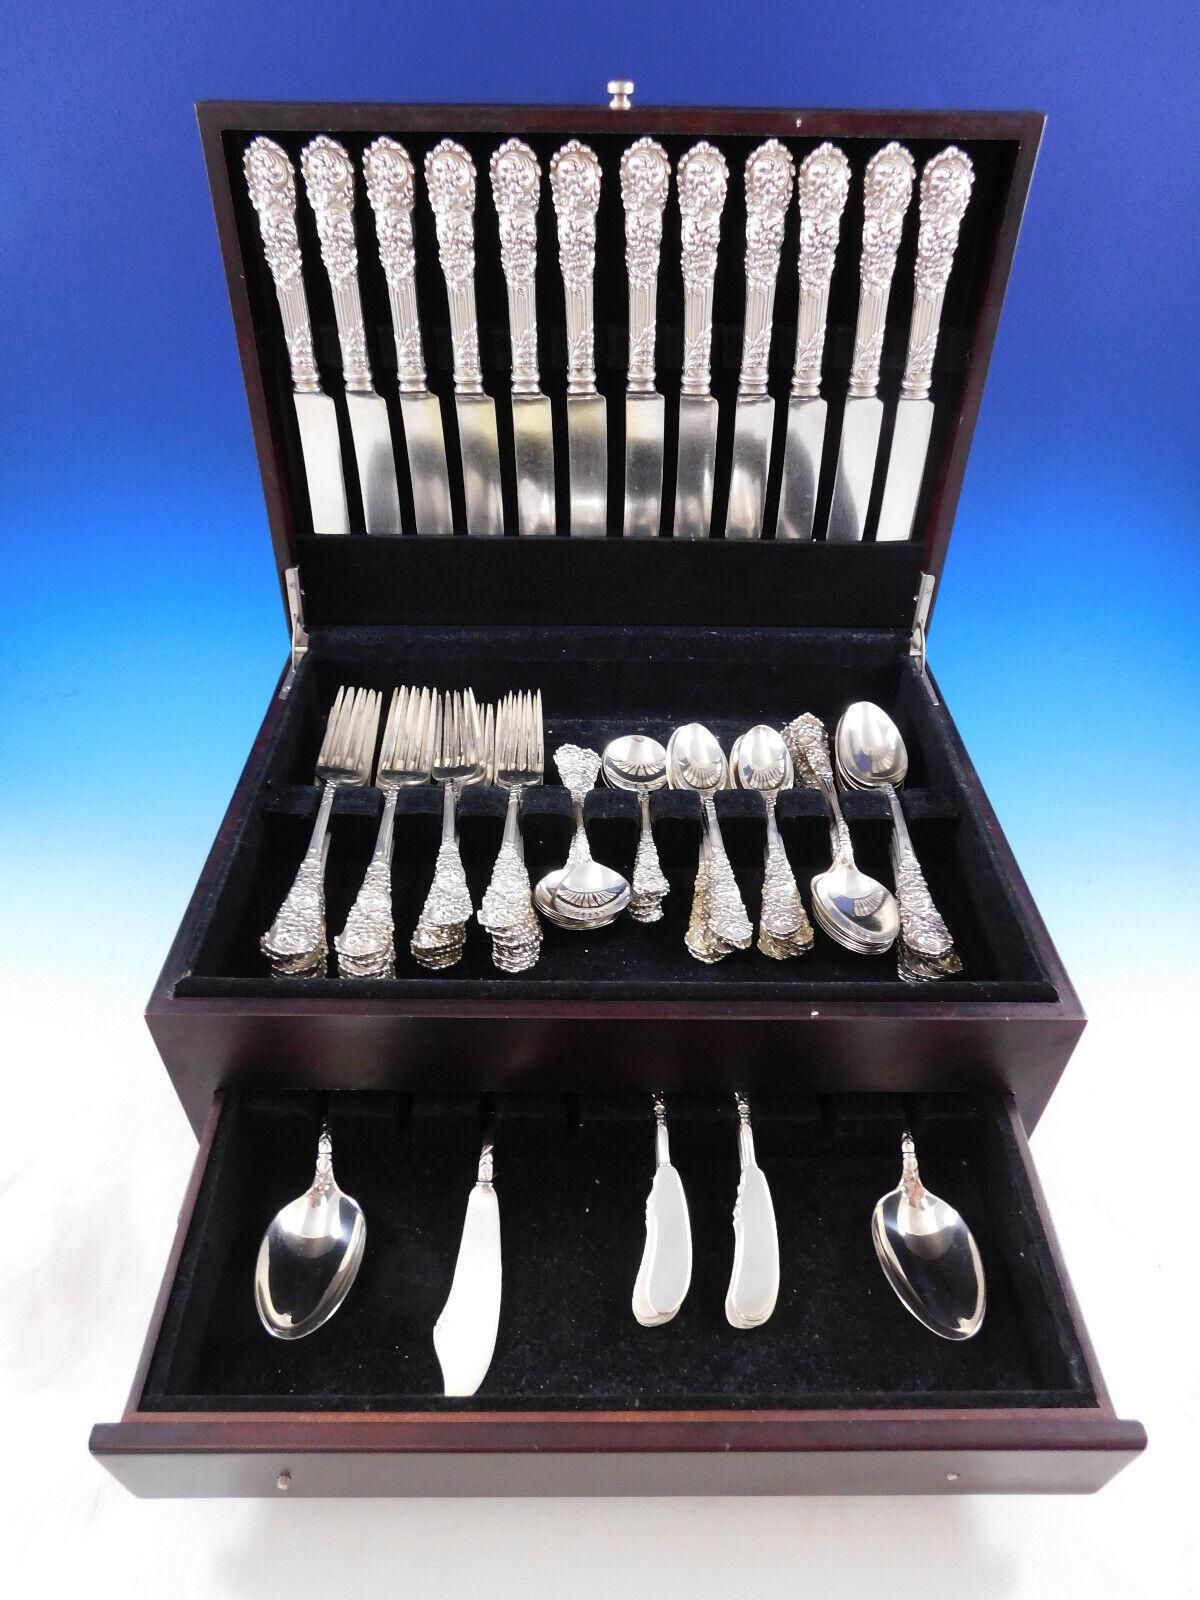 Reed & Barton's rare Trajan Sterling Silver Flatware beautifully captures ornate, old world elegance. Each piece is lavishly decorated with rococo scrolls, leaves, and flowers.

Superb Trajan by Reed and Barton sterling silver flatware set with